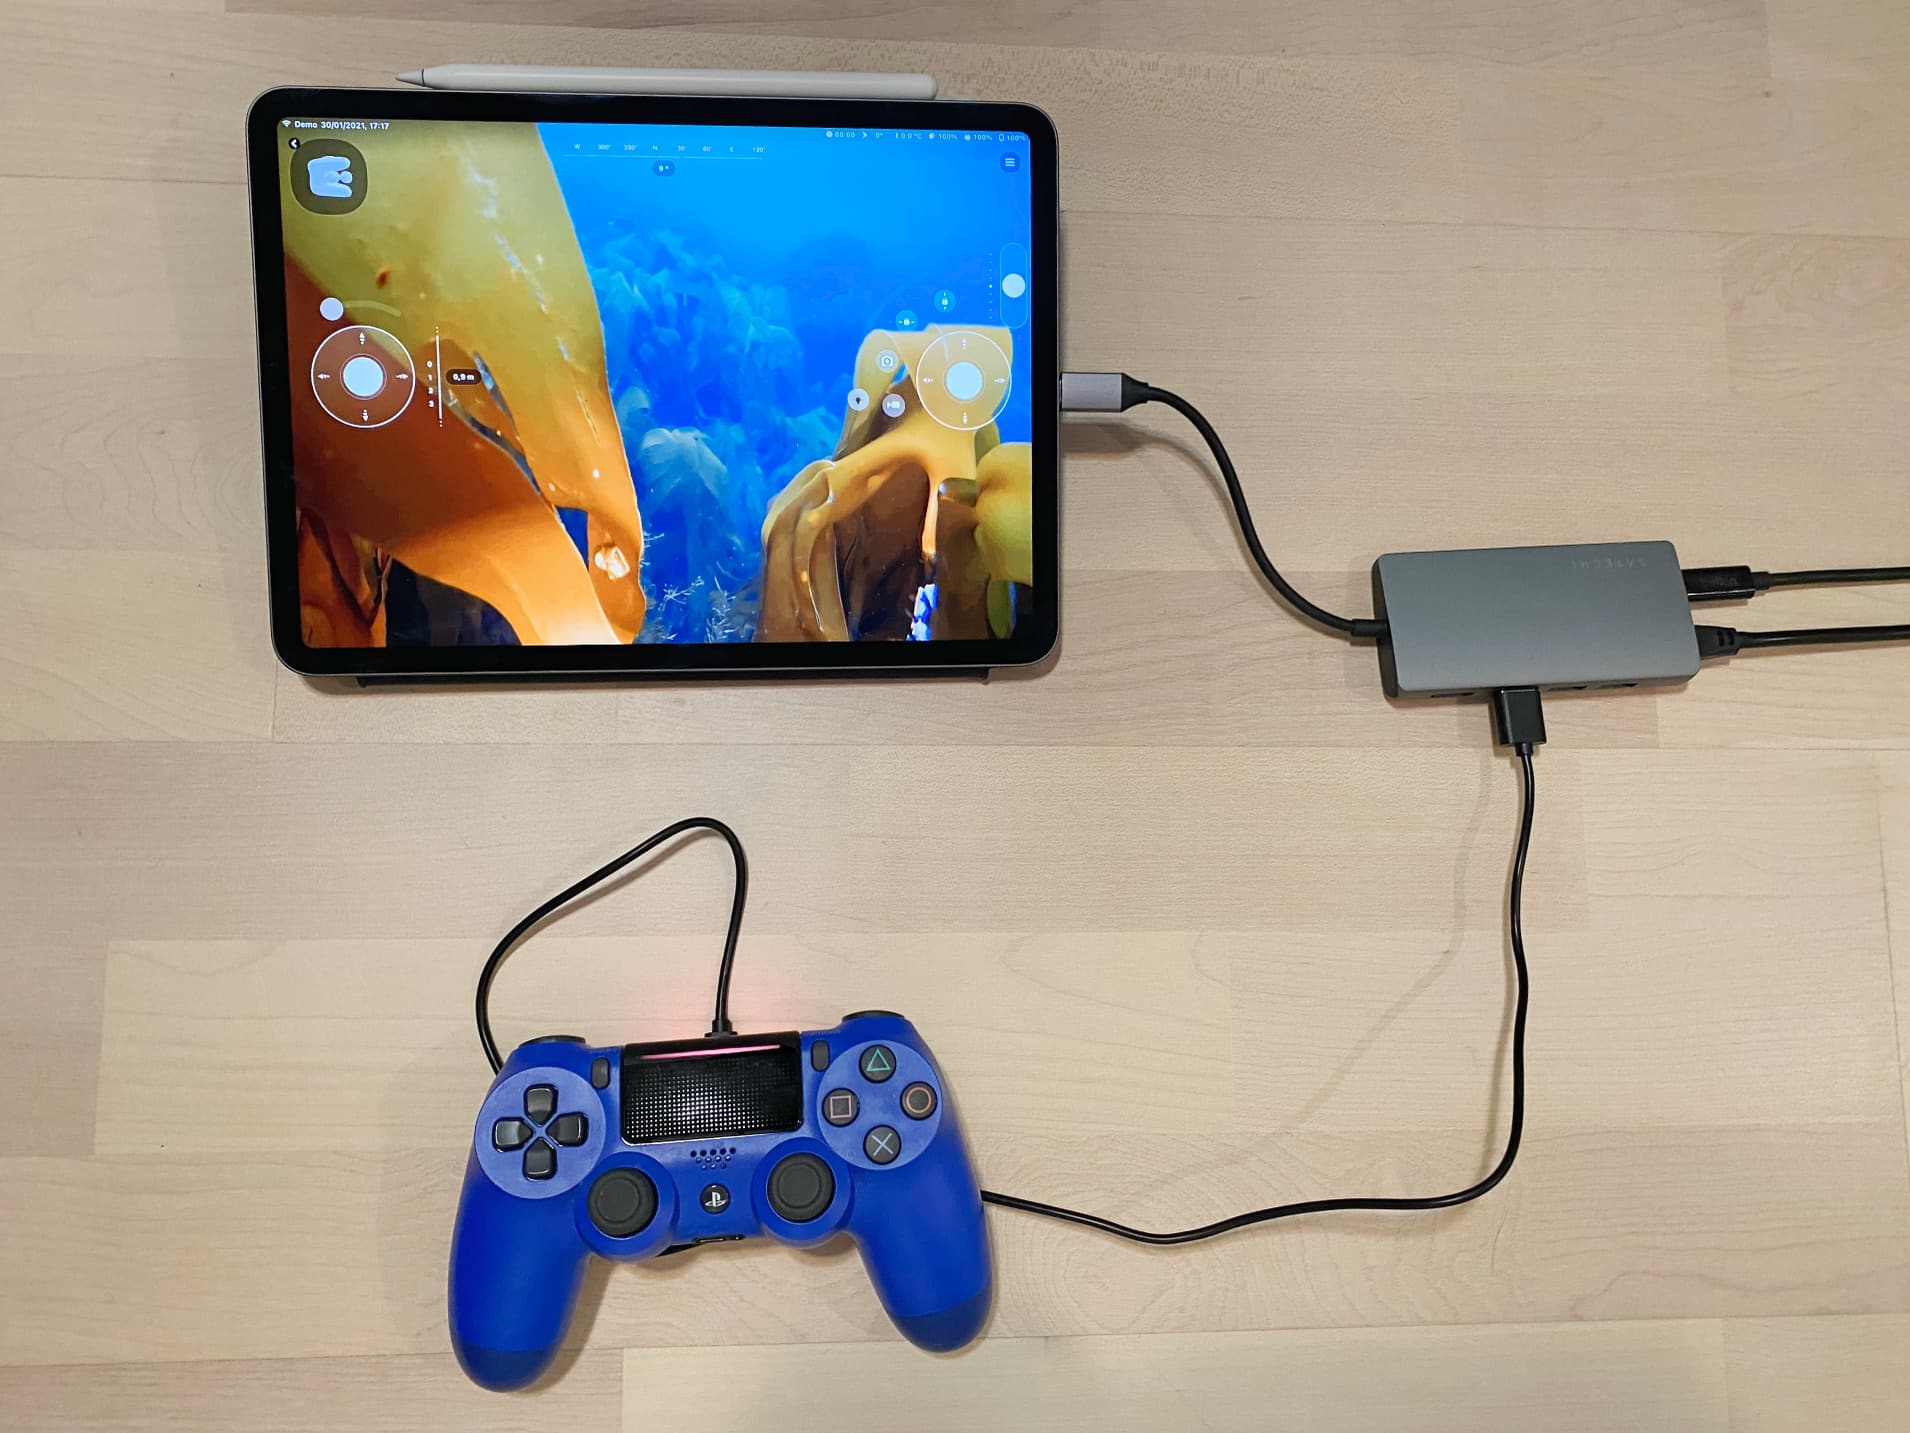 Fully wired network and controller connection from iPad Pro.